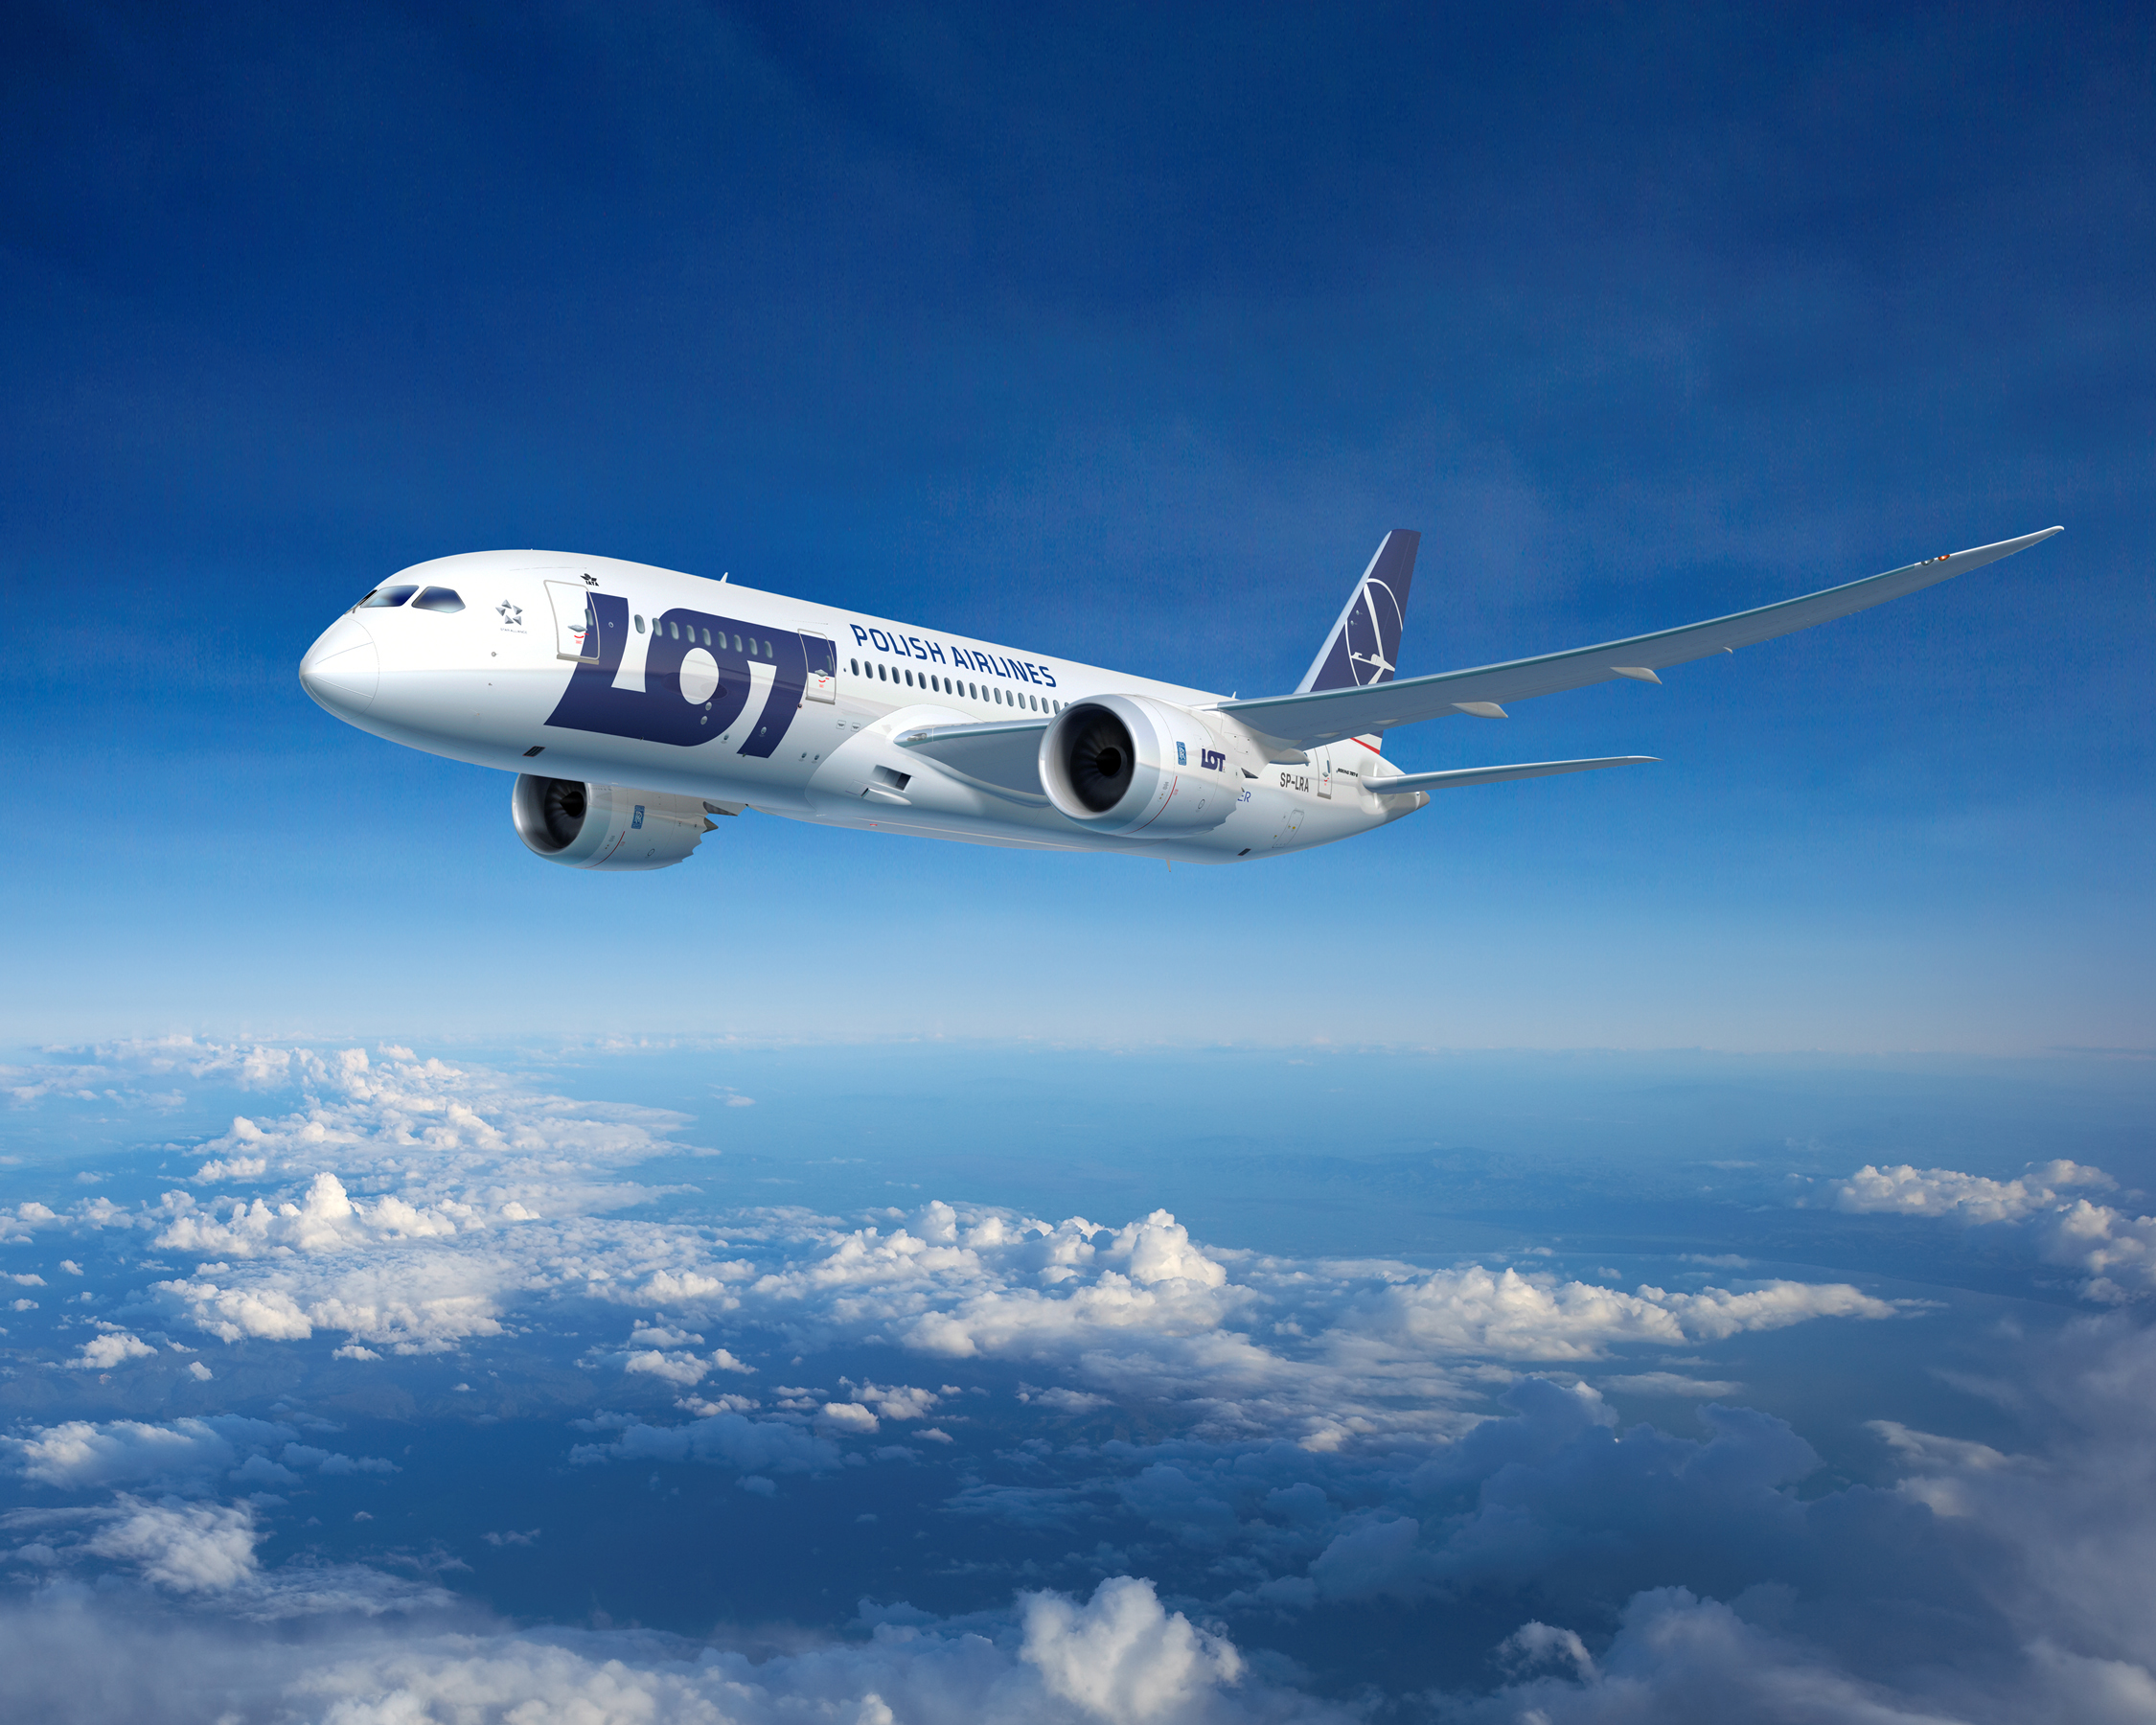 LOT Polish Airlines to connect Warsaw and Delhi in September 2019 - Live  from a Lounge